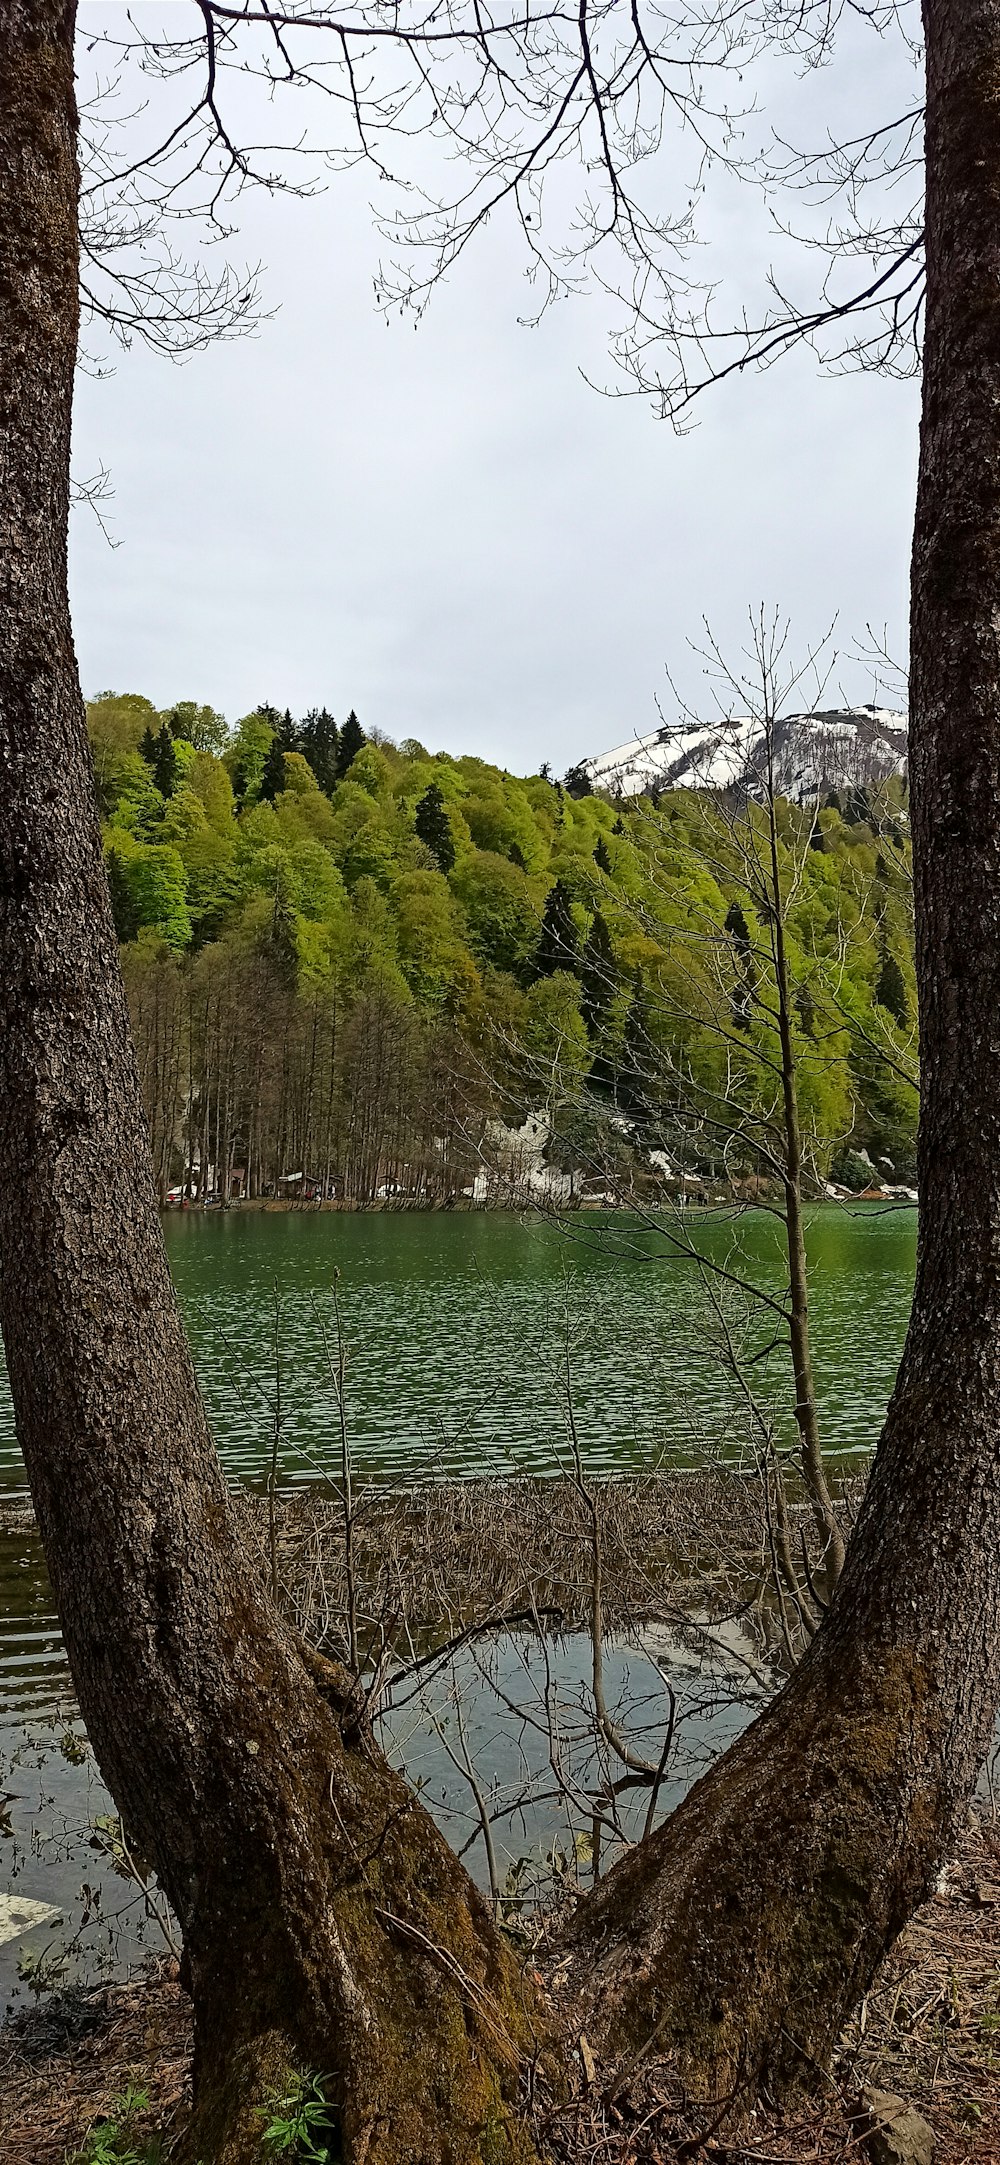 a view of a body of water through two trees